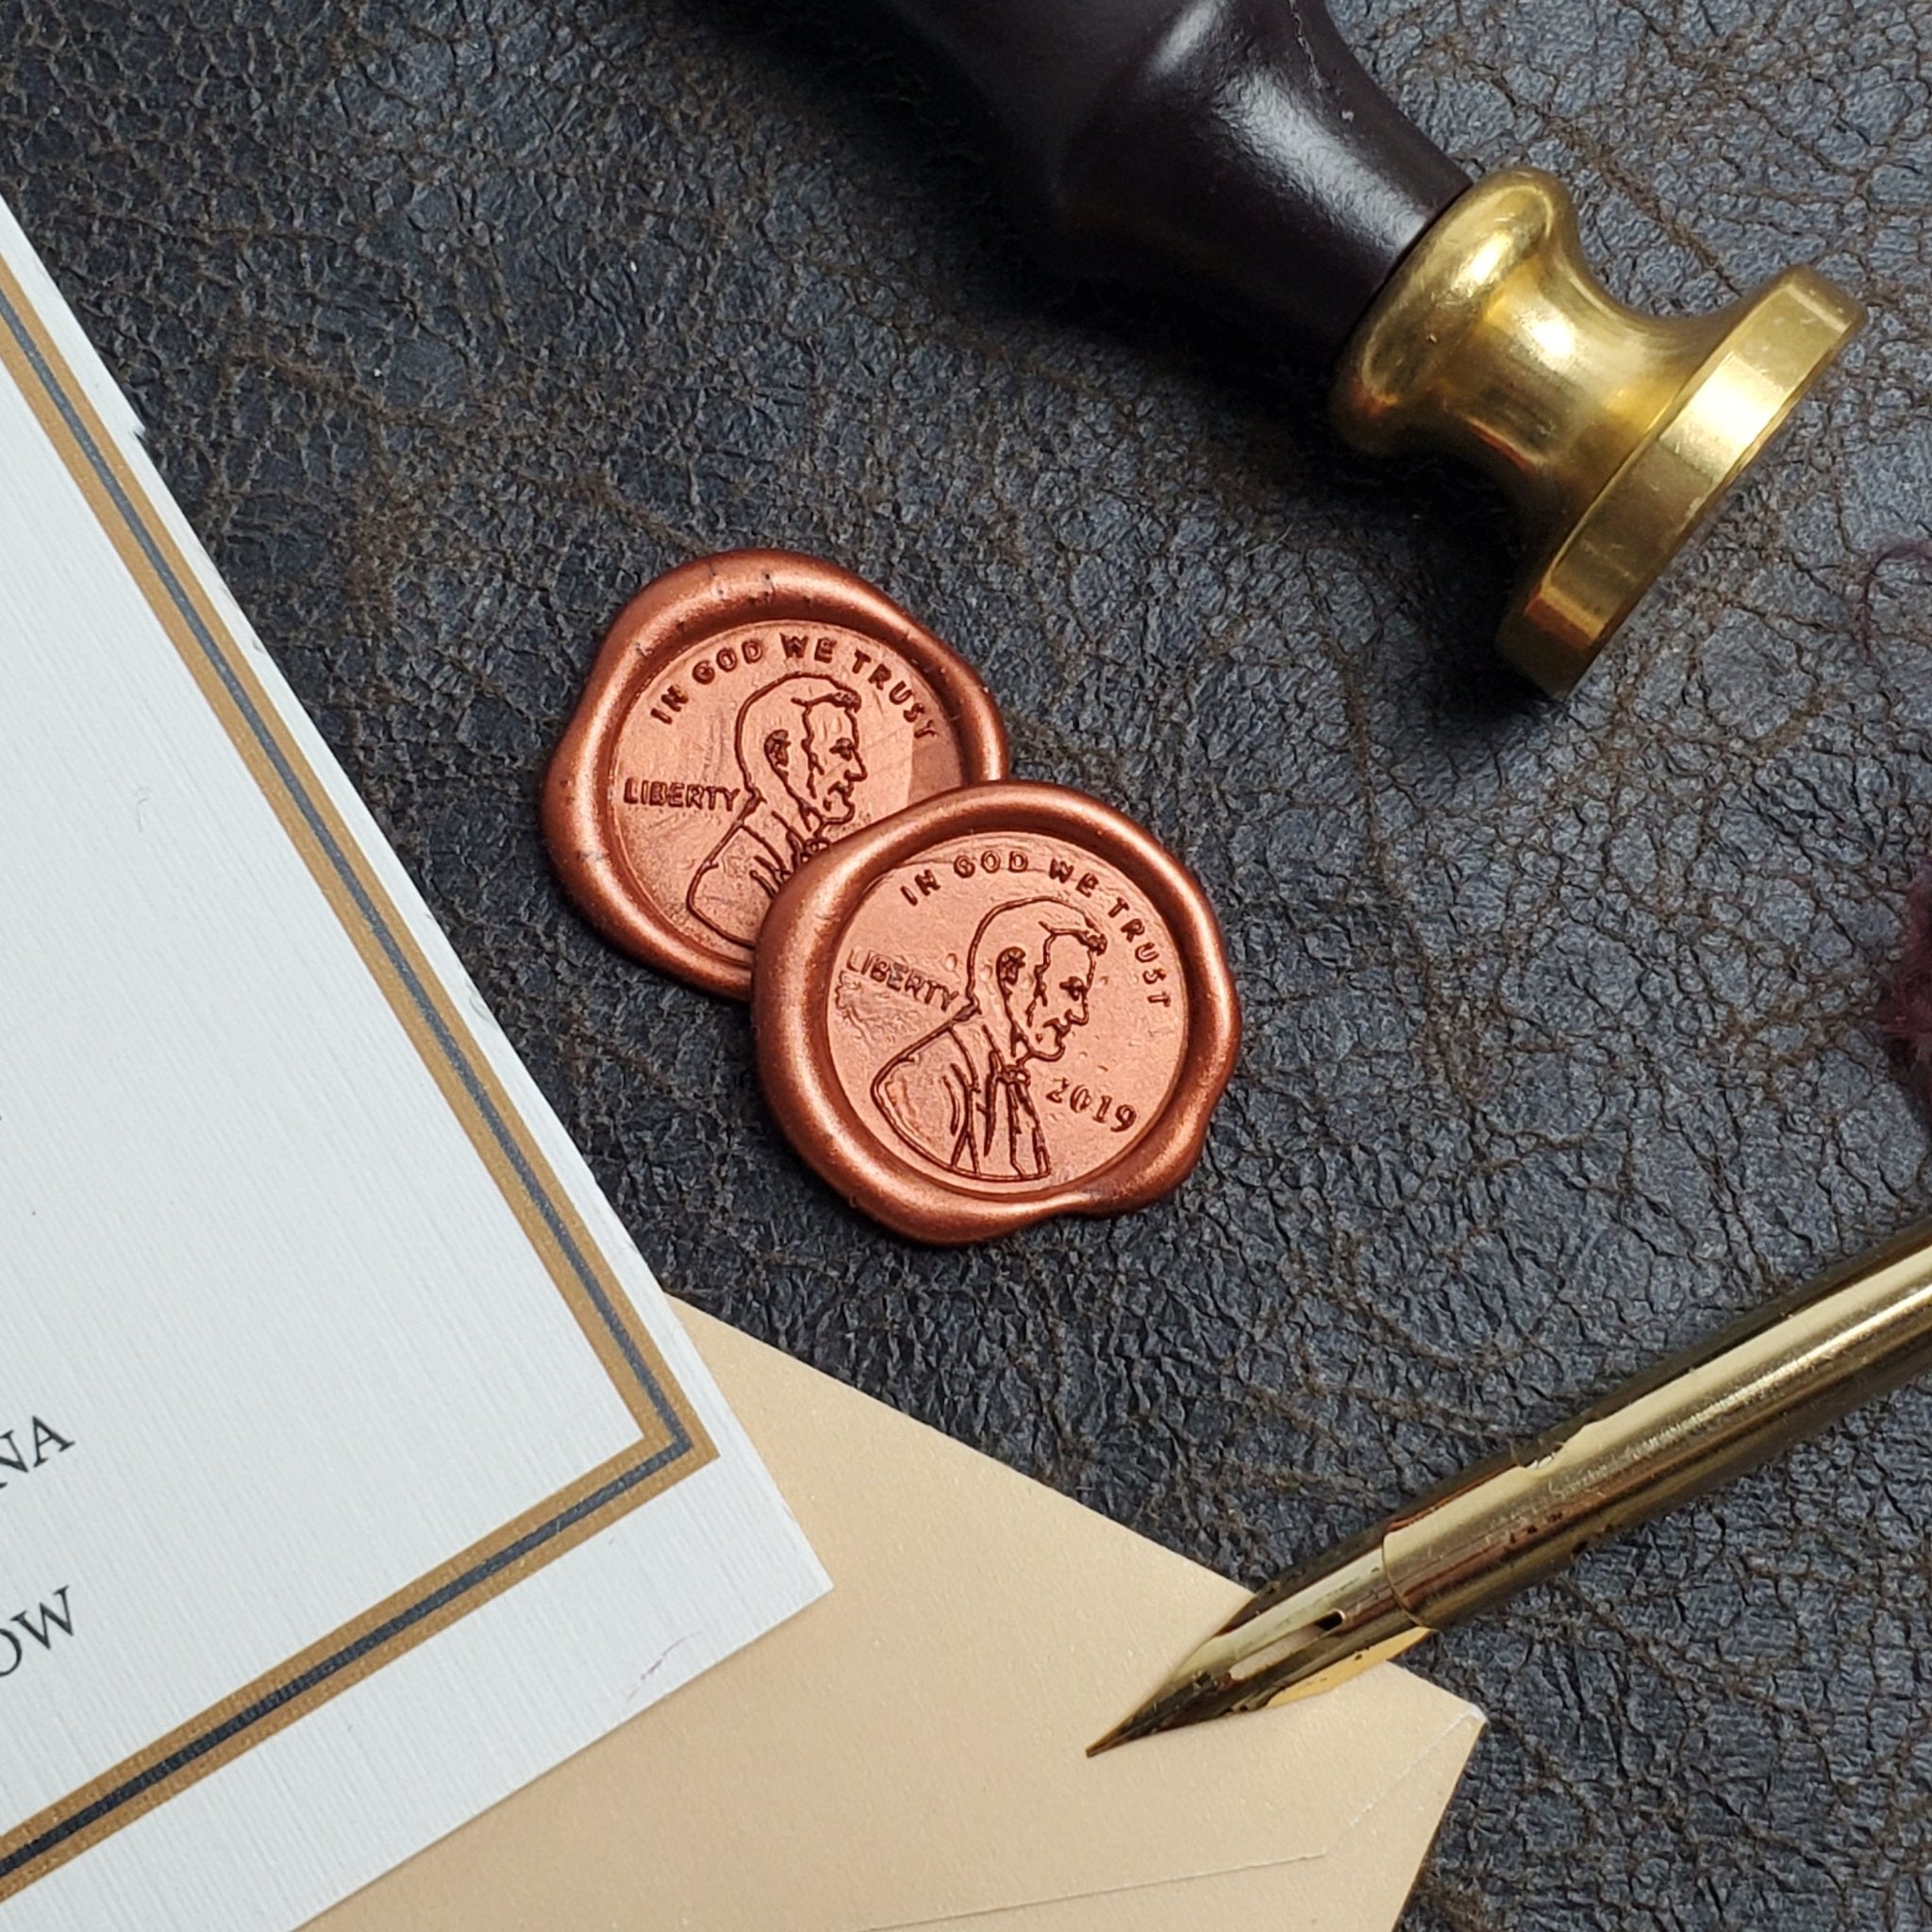 Create Your Own Custom Wax Seal Stamp from your Logo or Art